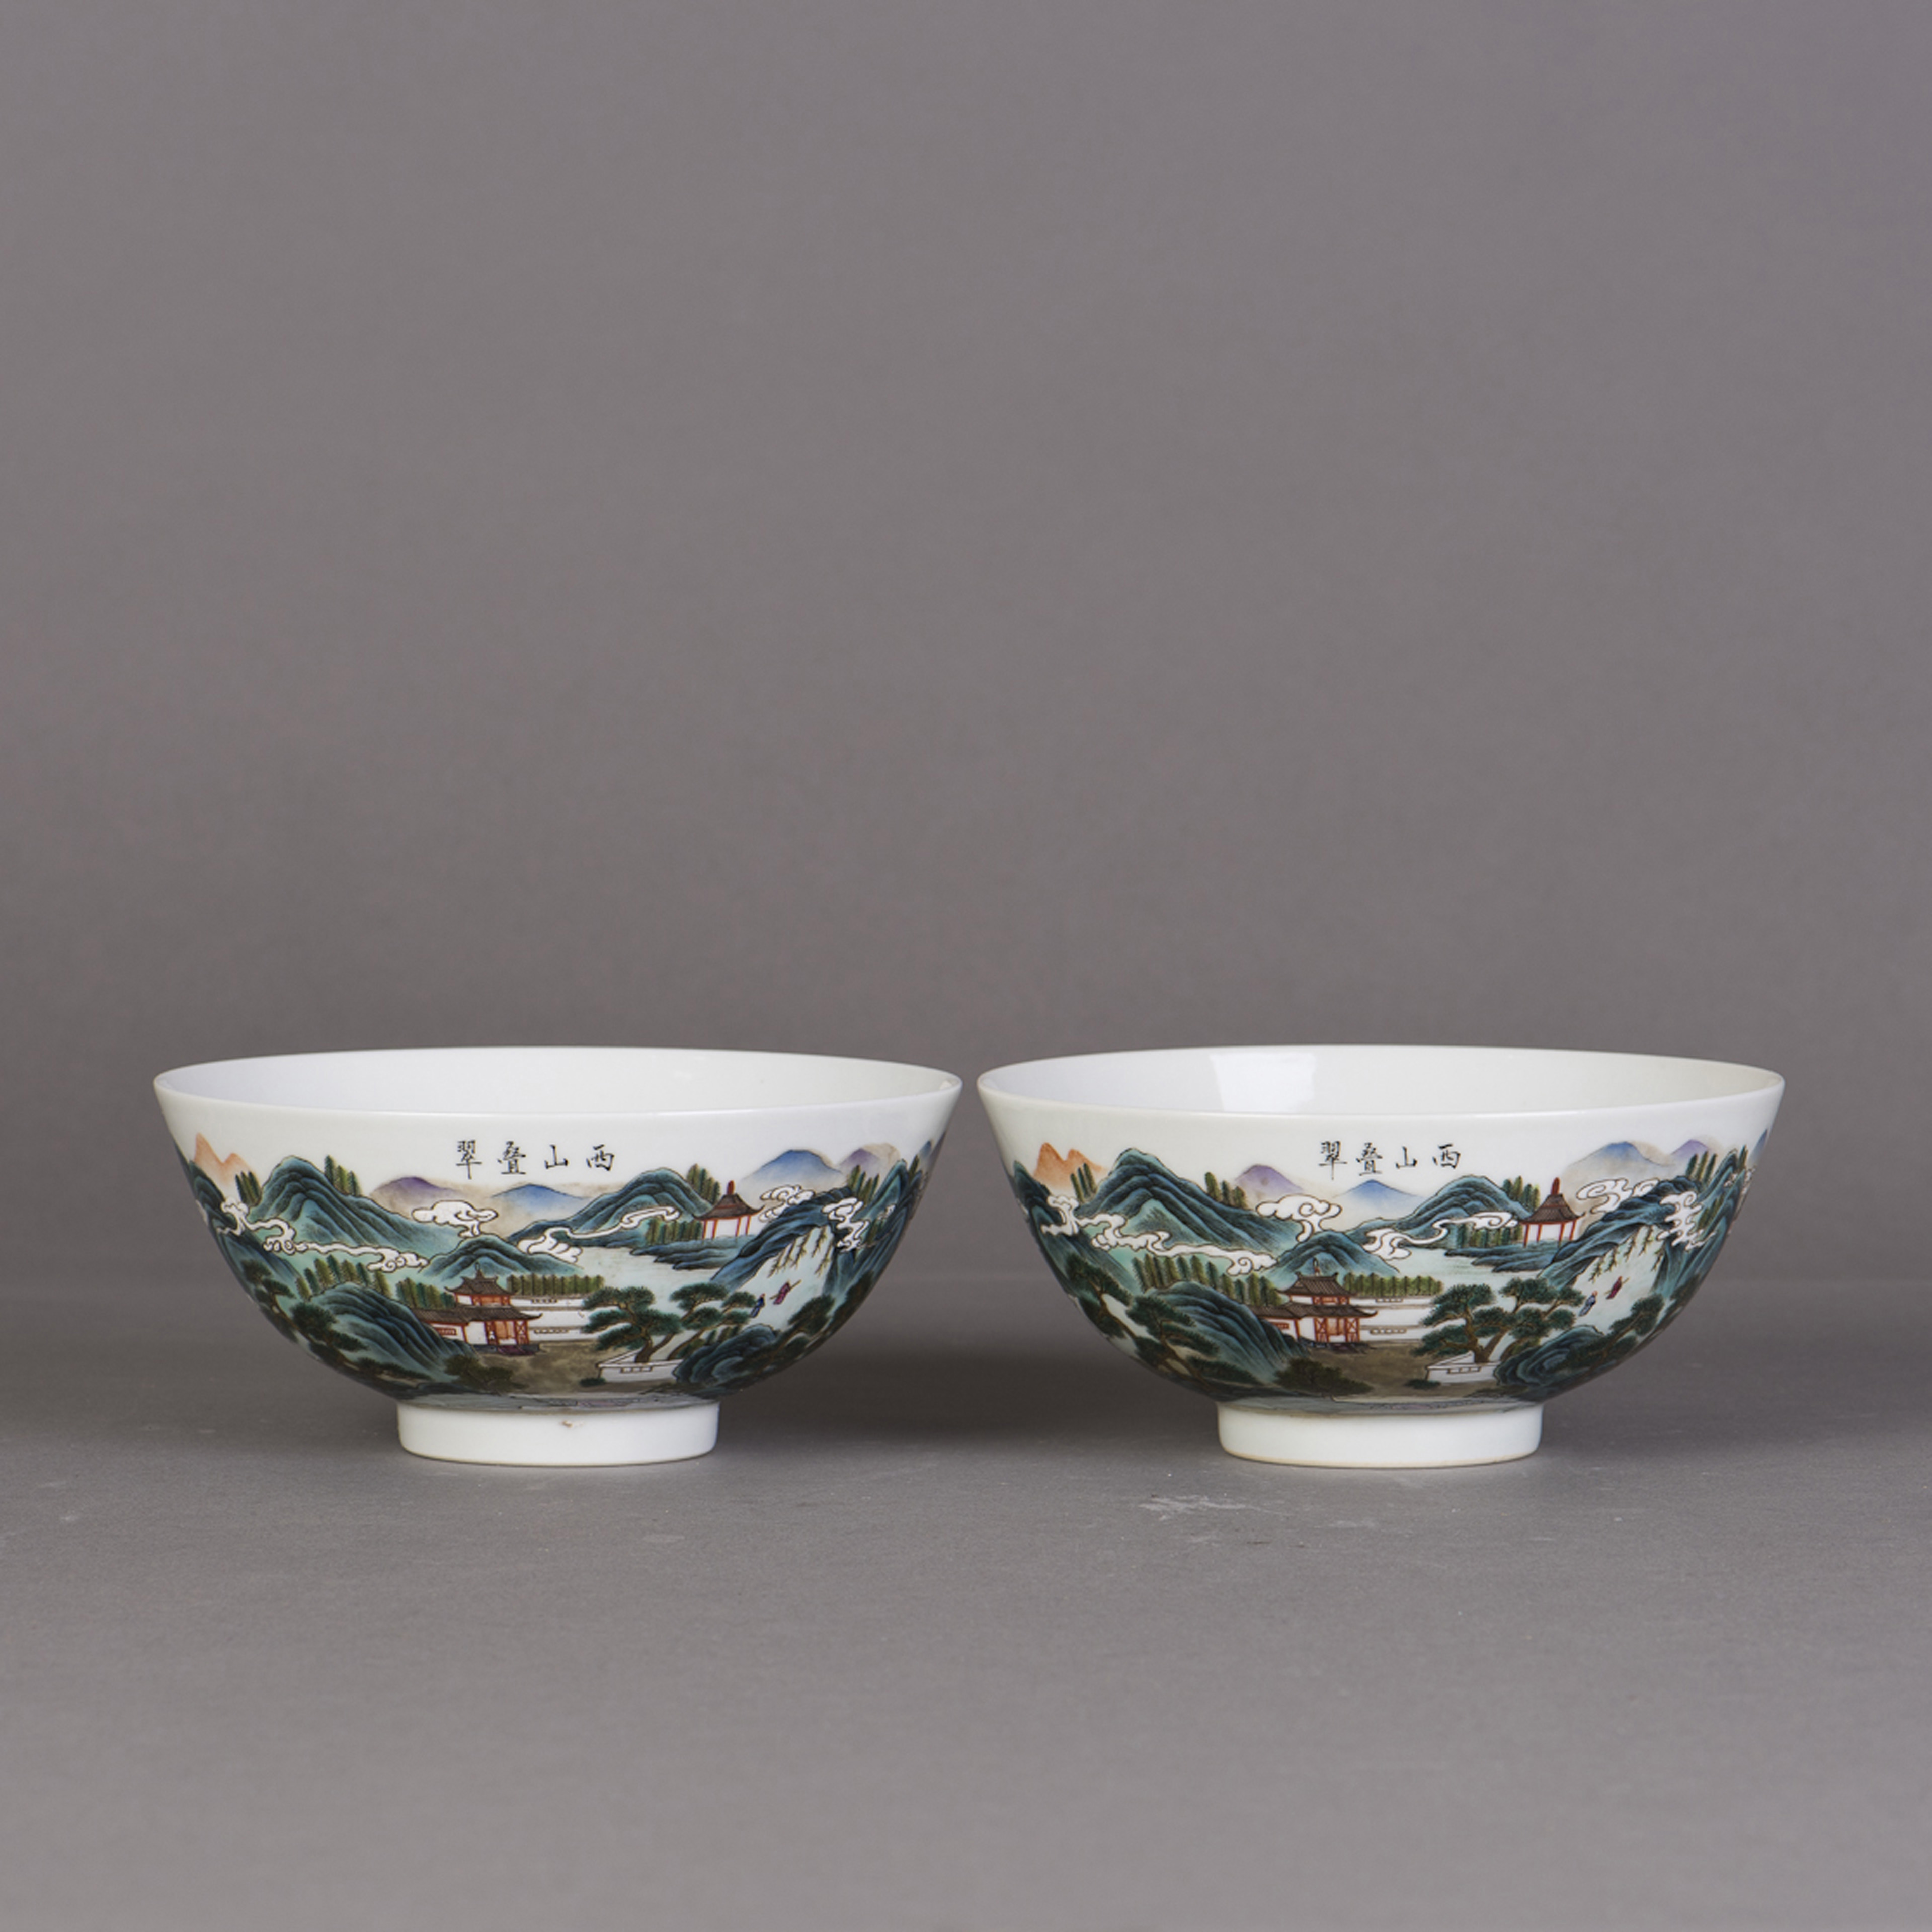 (LOT OF 2) PAIR OF CHINESE FAMILLE